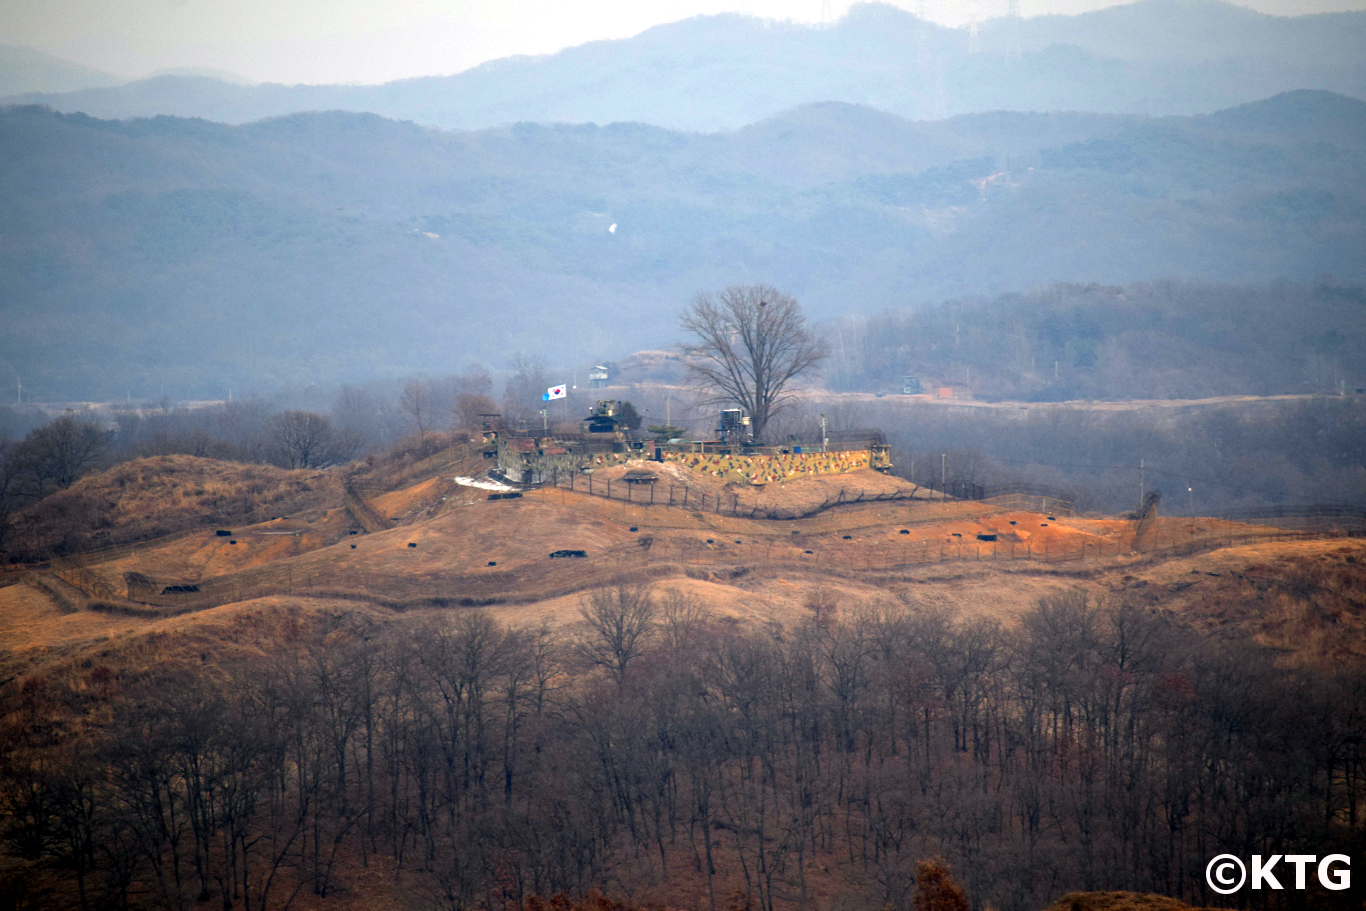 South Korean military post across the DMZ seen from North Korea. You can see the UN and South Korean flags fluttering in the wind. Trip arranged by KTG to see the Concrete Wall from Kaesong in North Korea